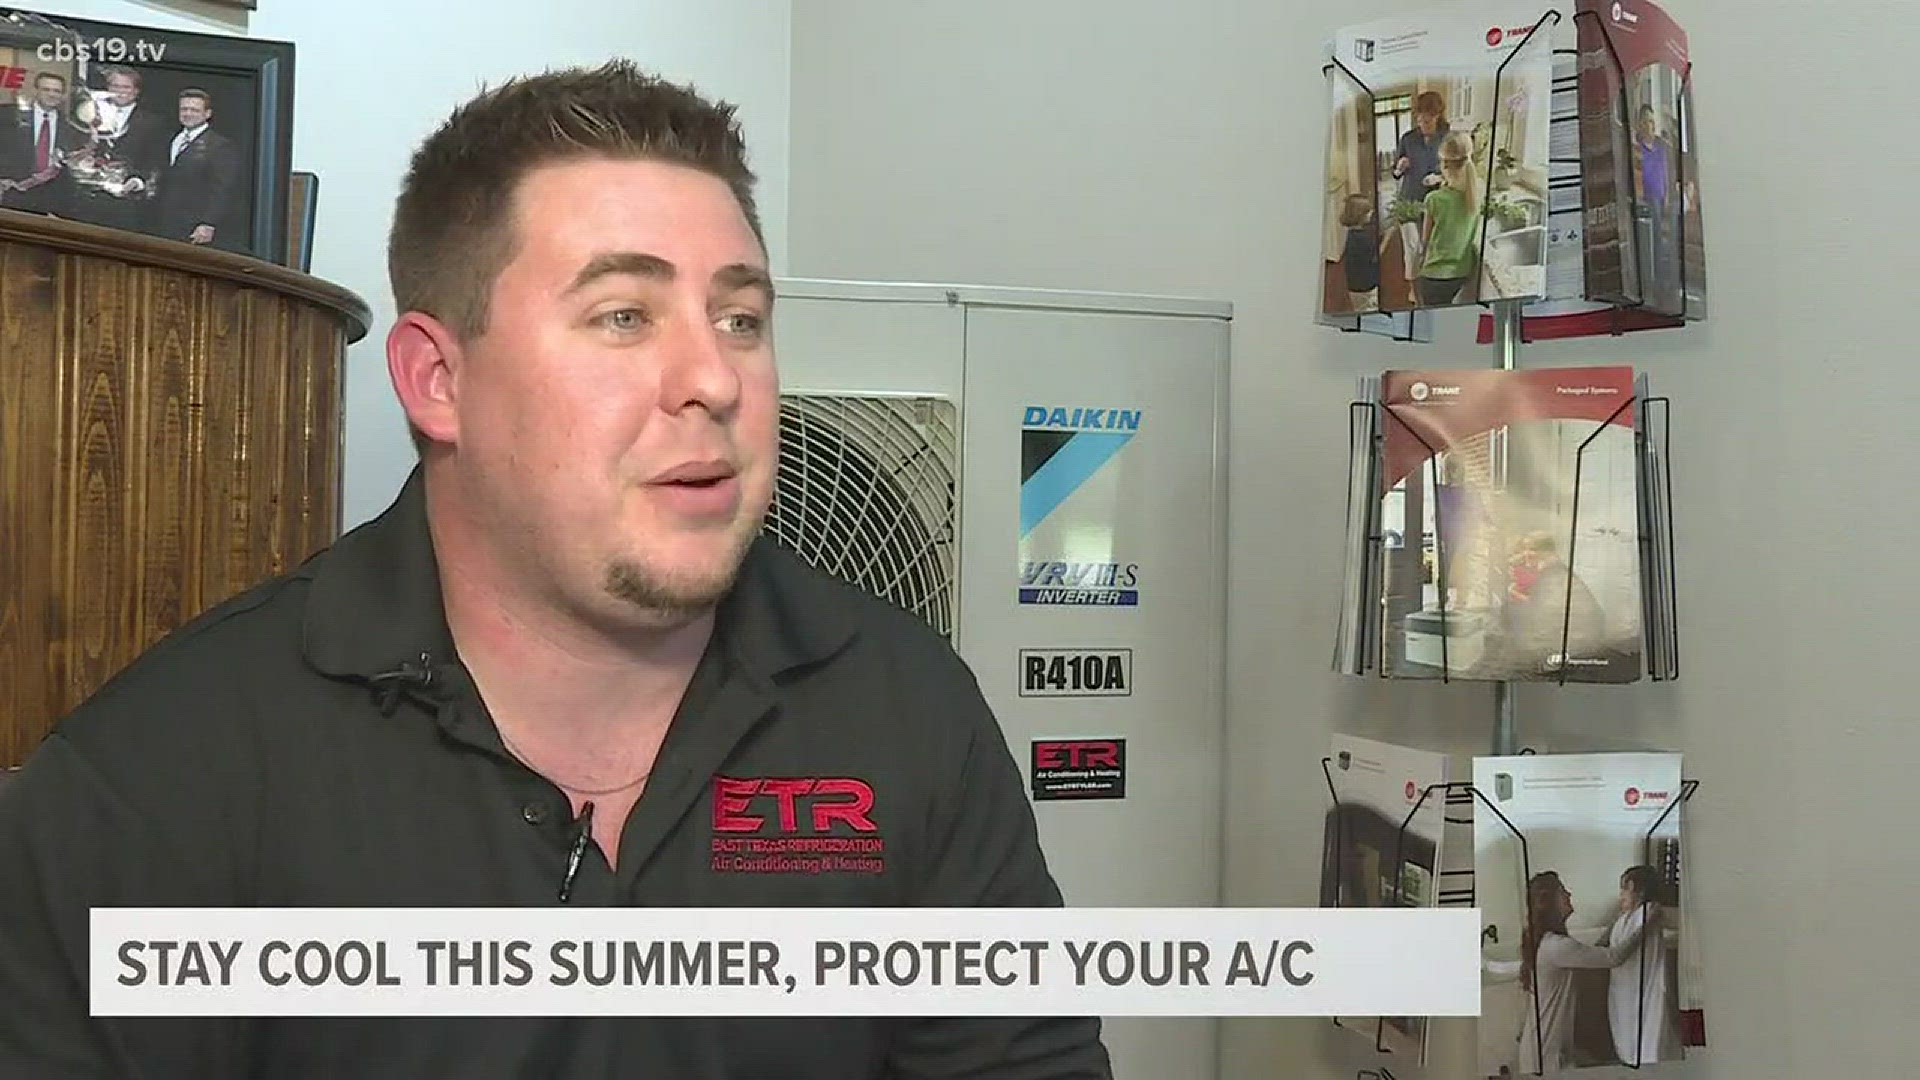 Maintain your a/c or it could break in the summer heat.